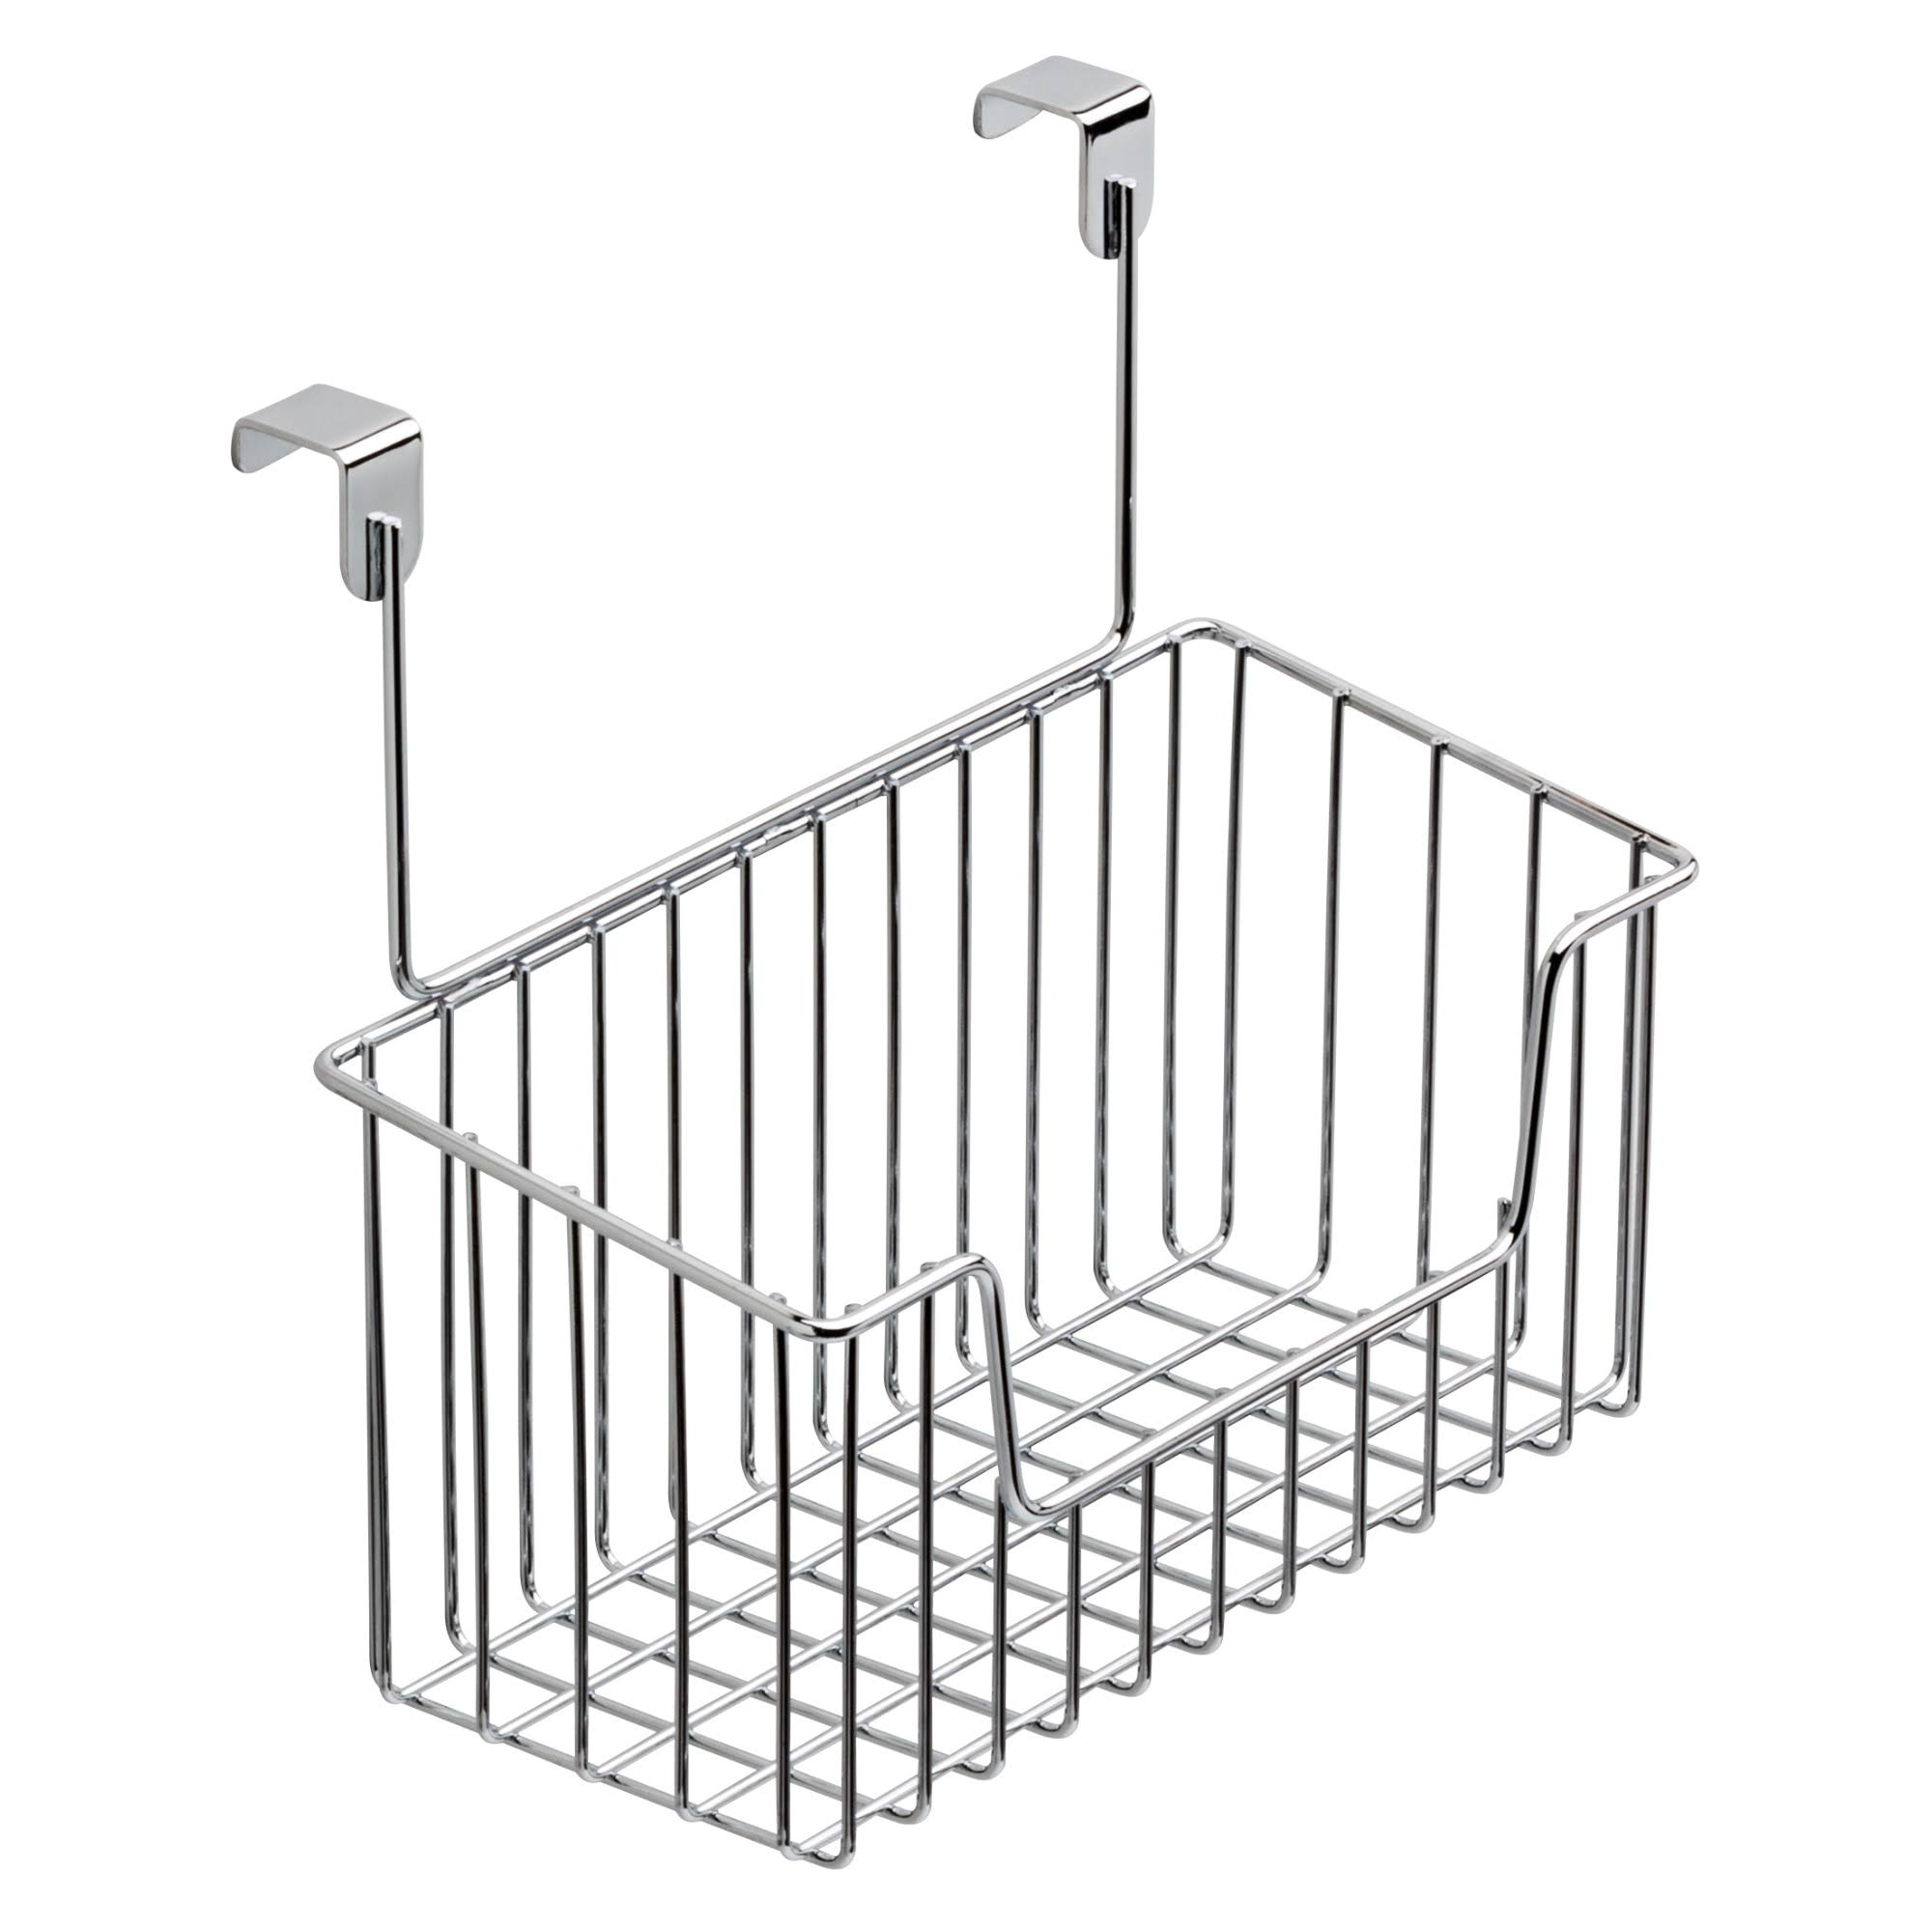 Over-the-Cabinet Small Storage and Oranization Basket, Bathroom Accessories, Polished Chrome